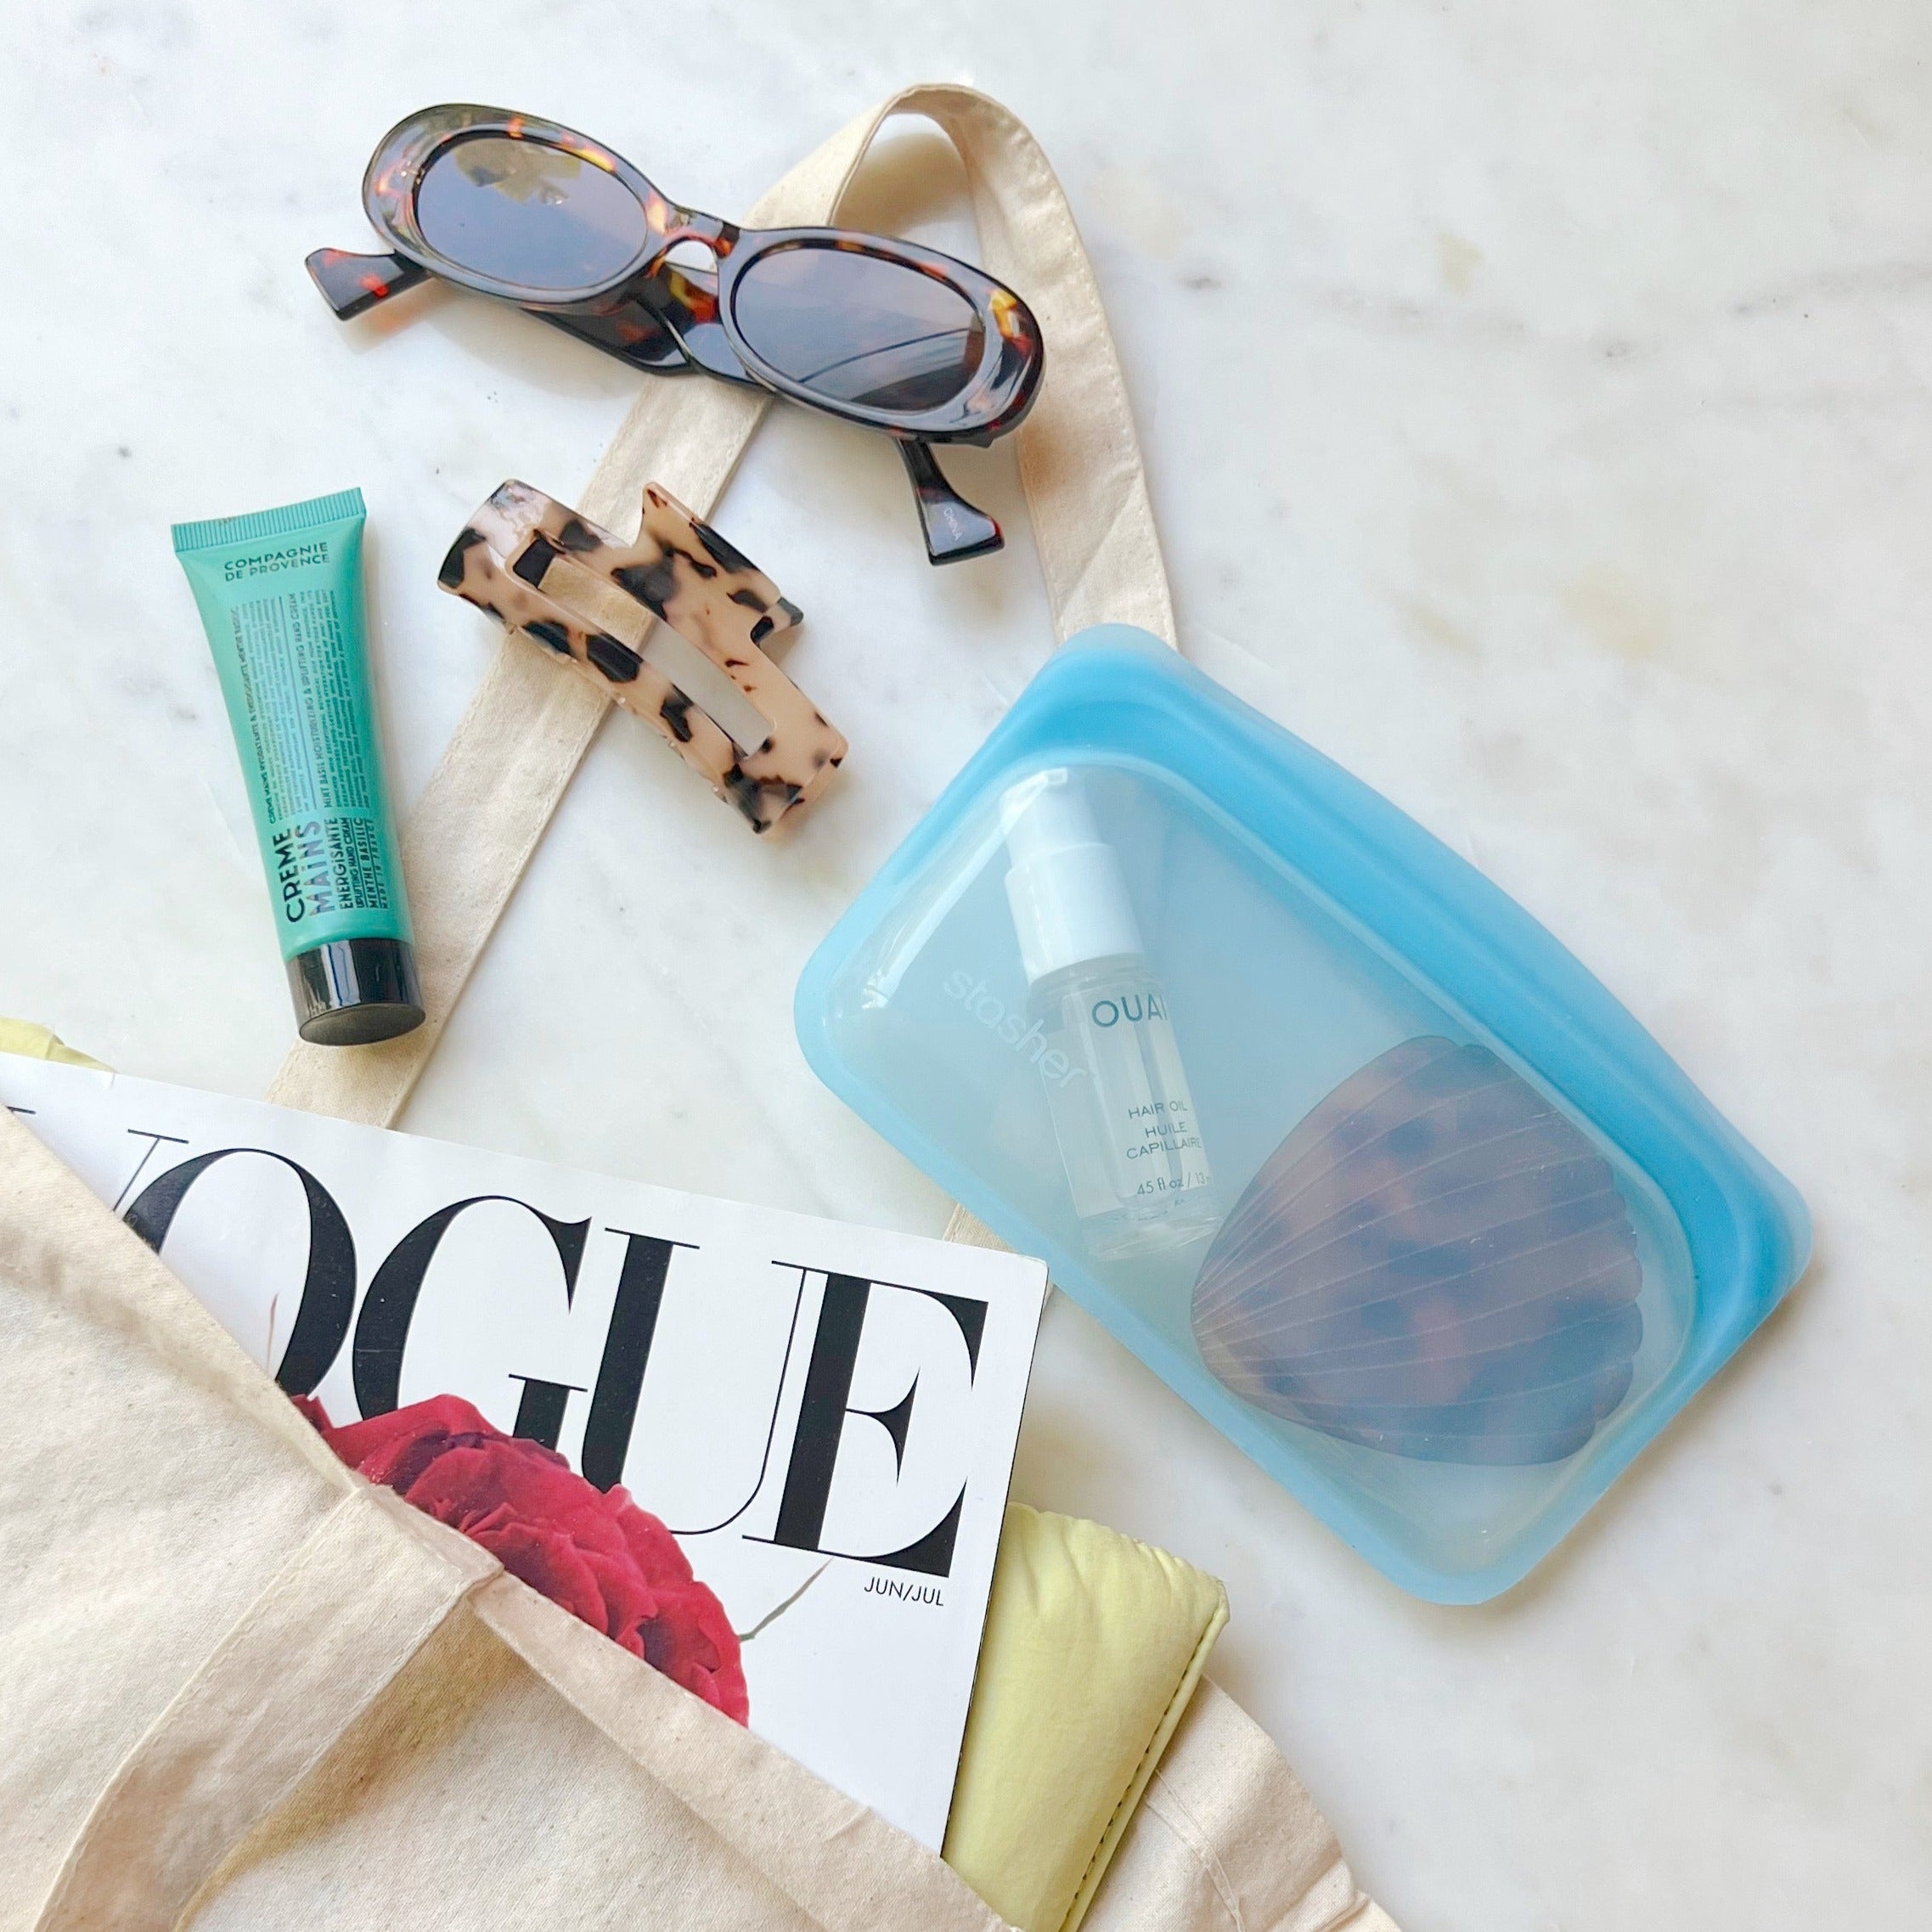 Small blue bag filled with hair essentials spilling out from tote bag.